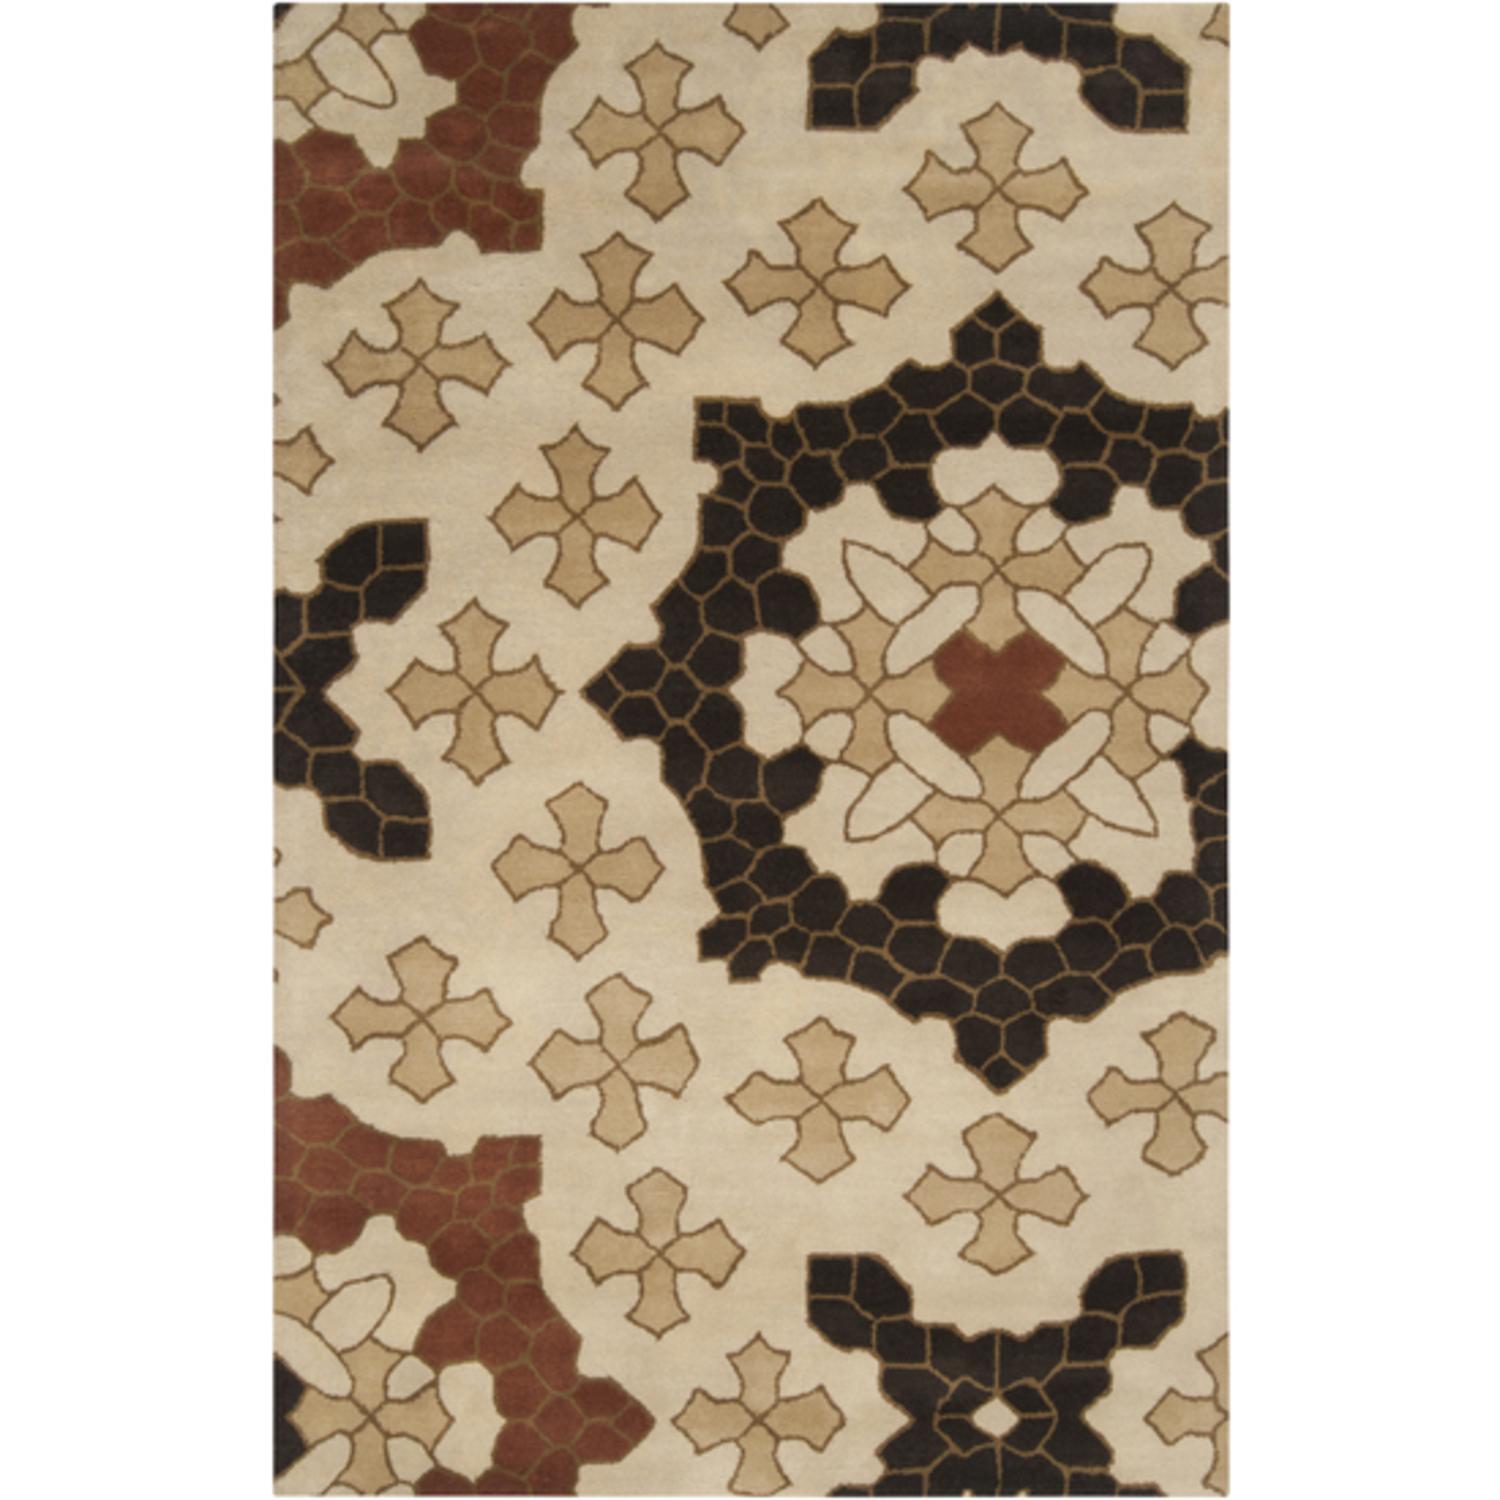 CC Home Furnishings 3.25' x 5.25' Floral Puzzle Pieces Dark Brown and Parchment Wool Area Throw Rug